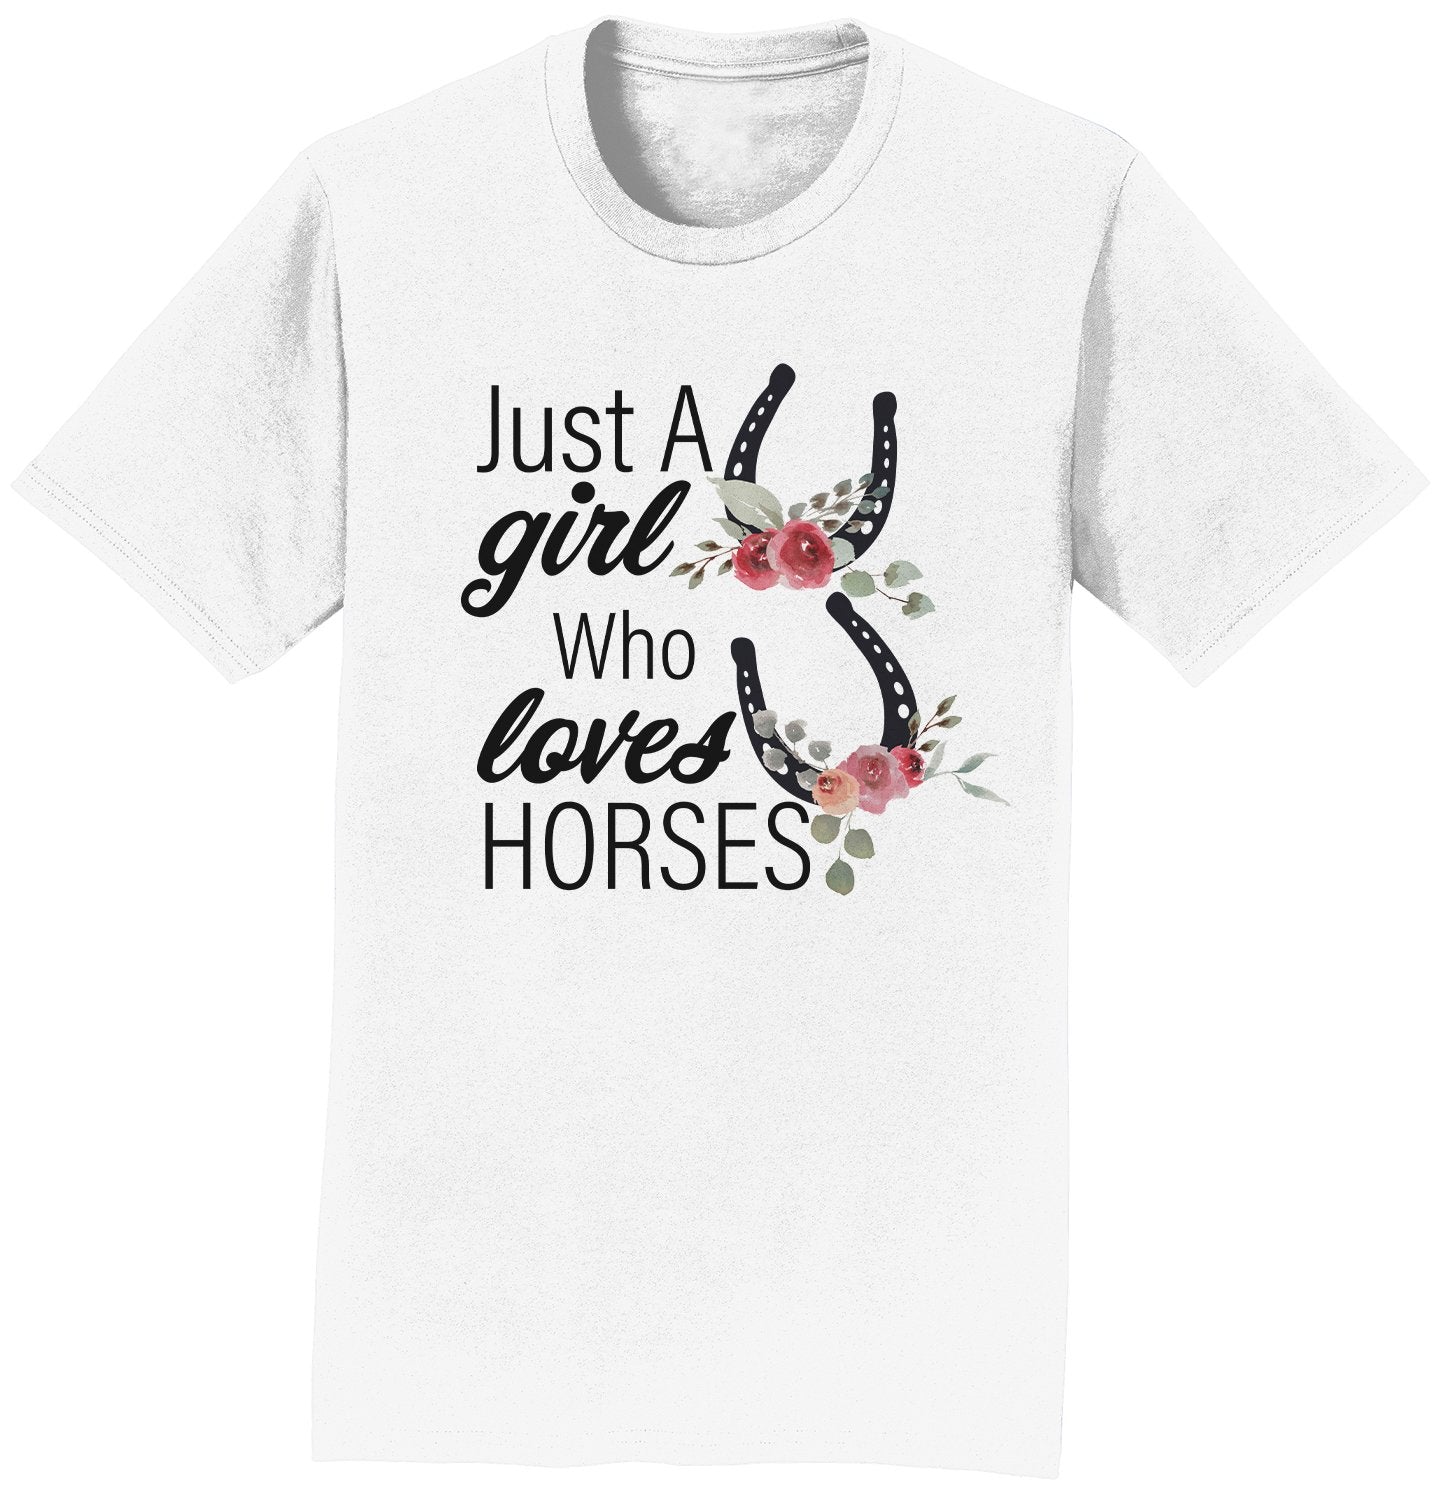 Just A Girl Who Loves Horses - Adult Unisex T-Shirt